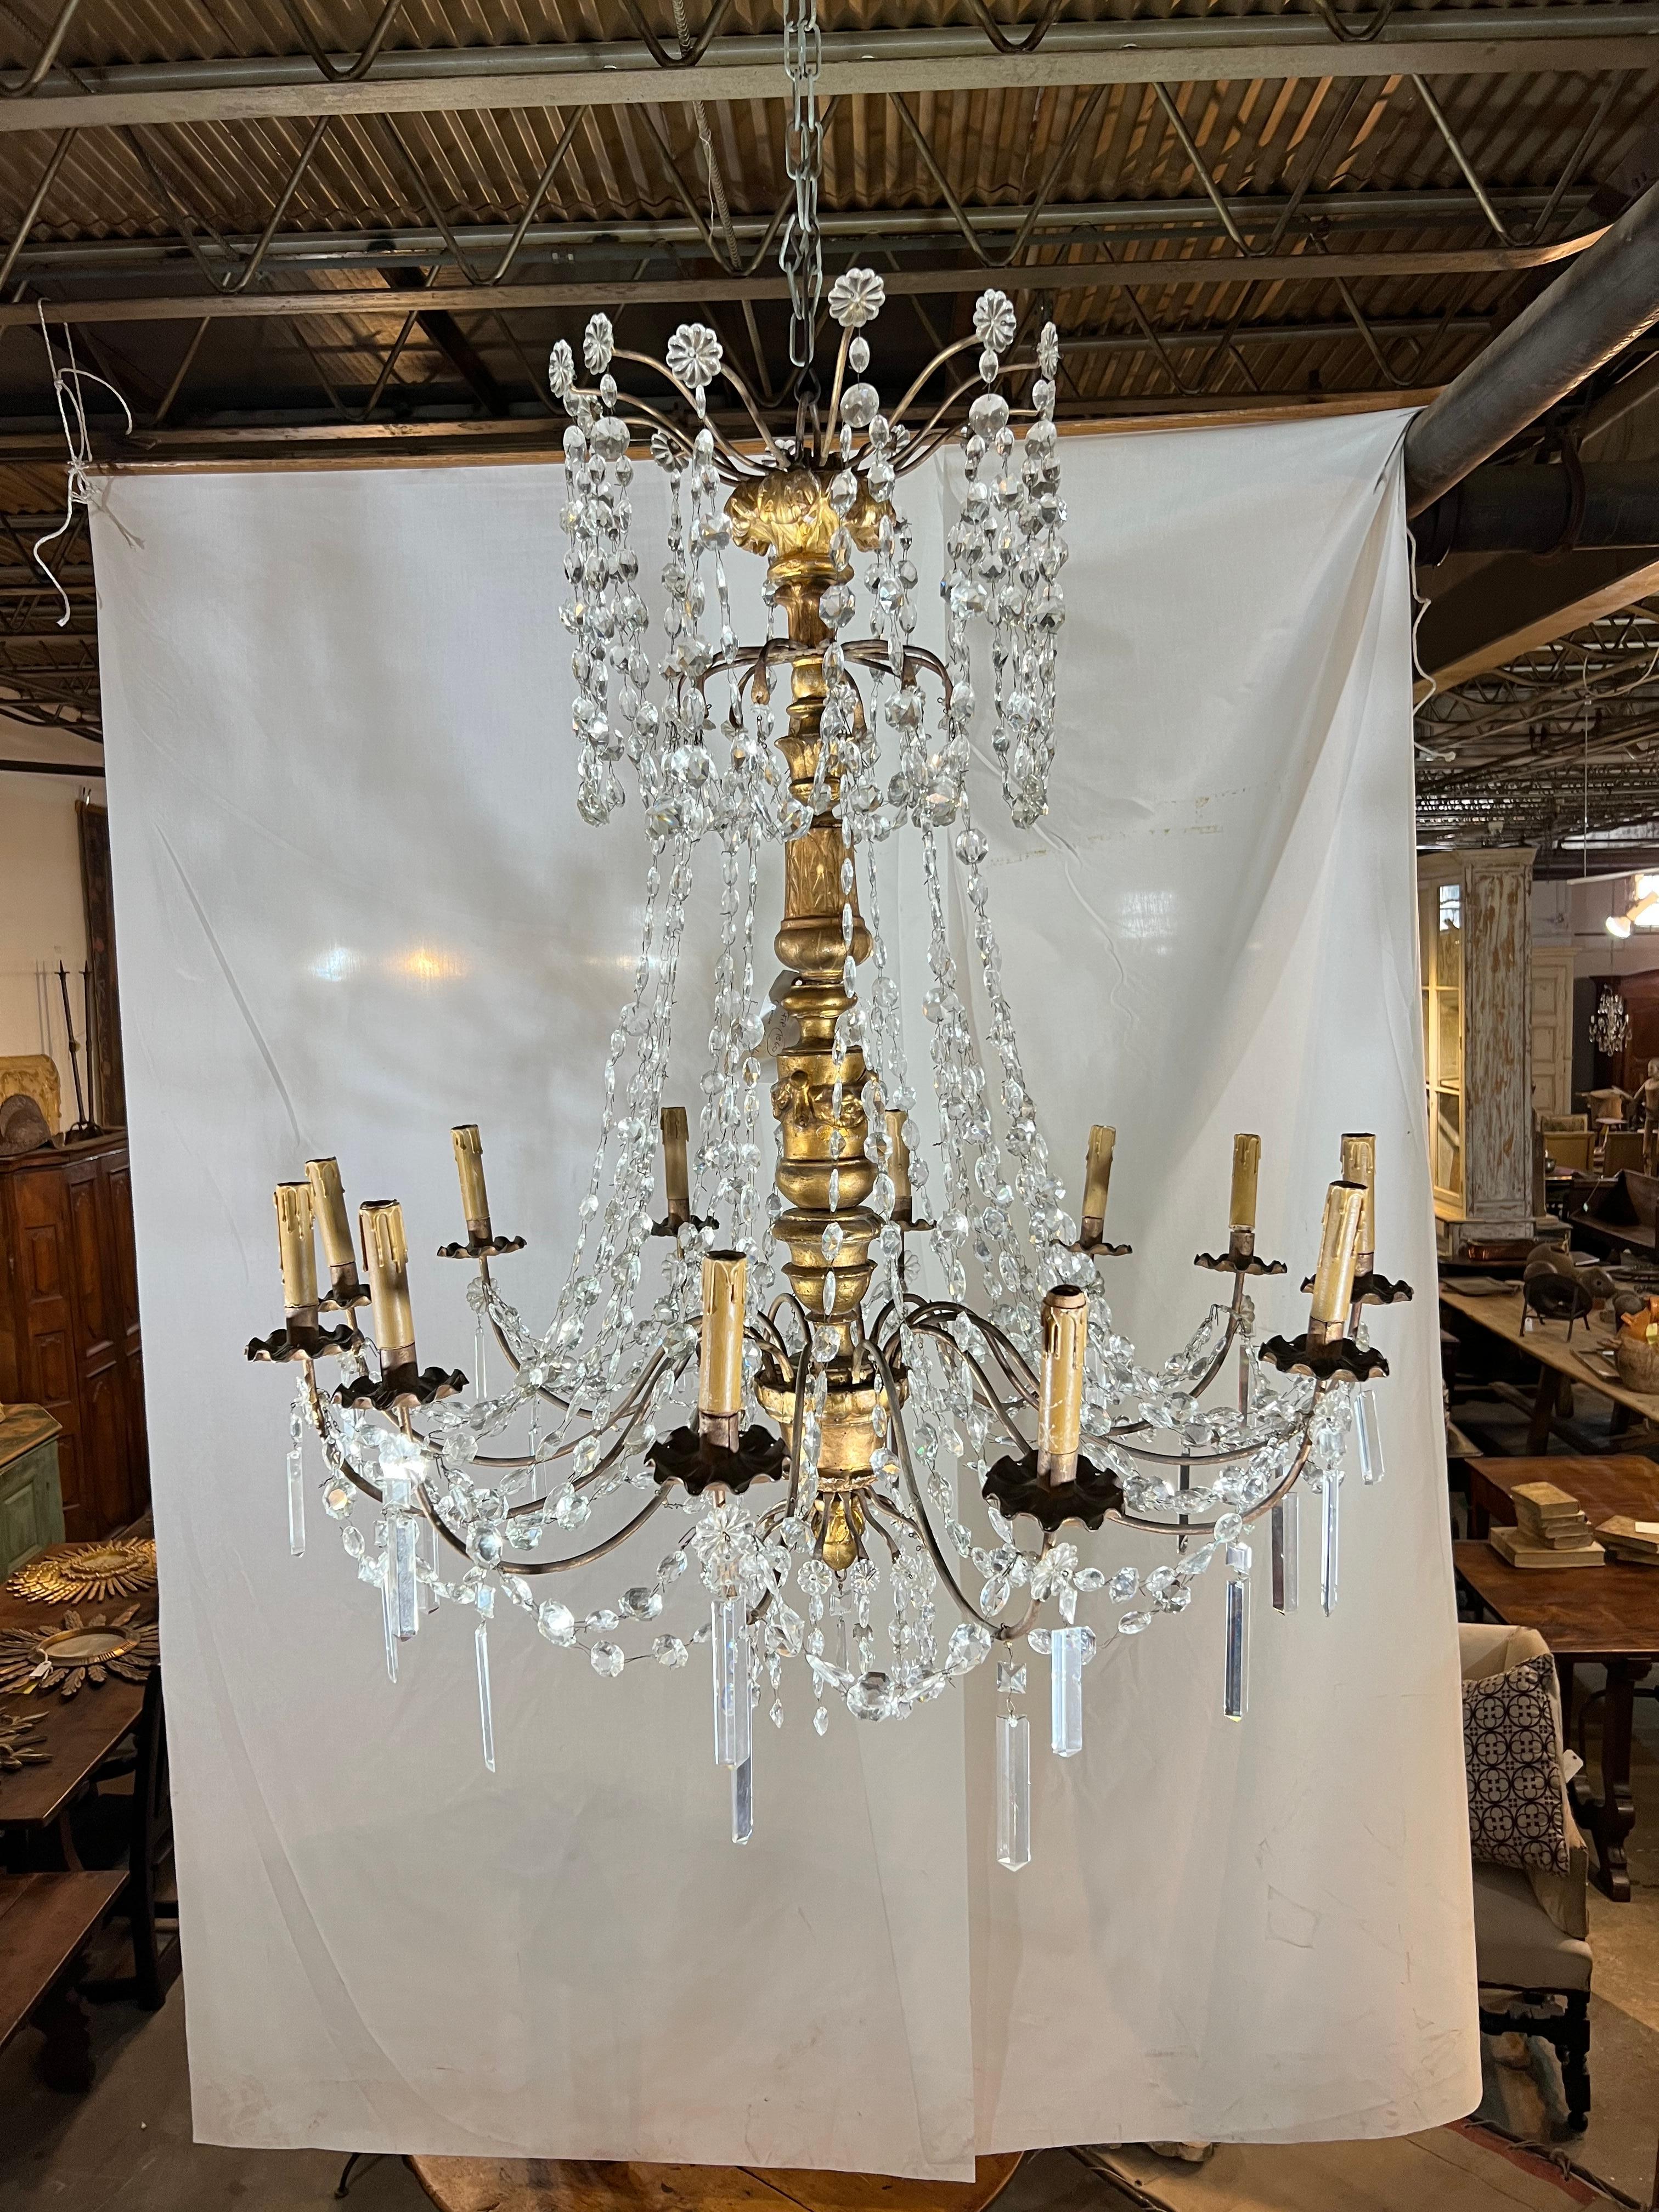 A stunning 18th century Chandelier from the Genoa region of Italy.  Beautifully crafted in giltwood and crystal with 12 lights.  The statement of its surrounding.  